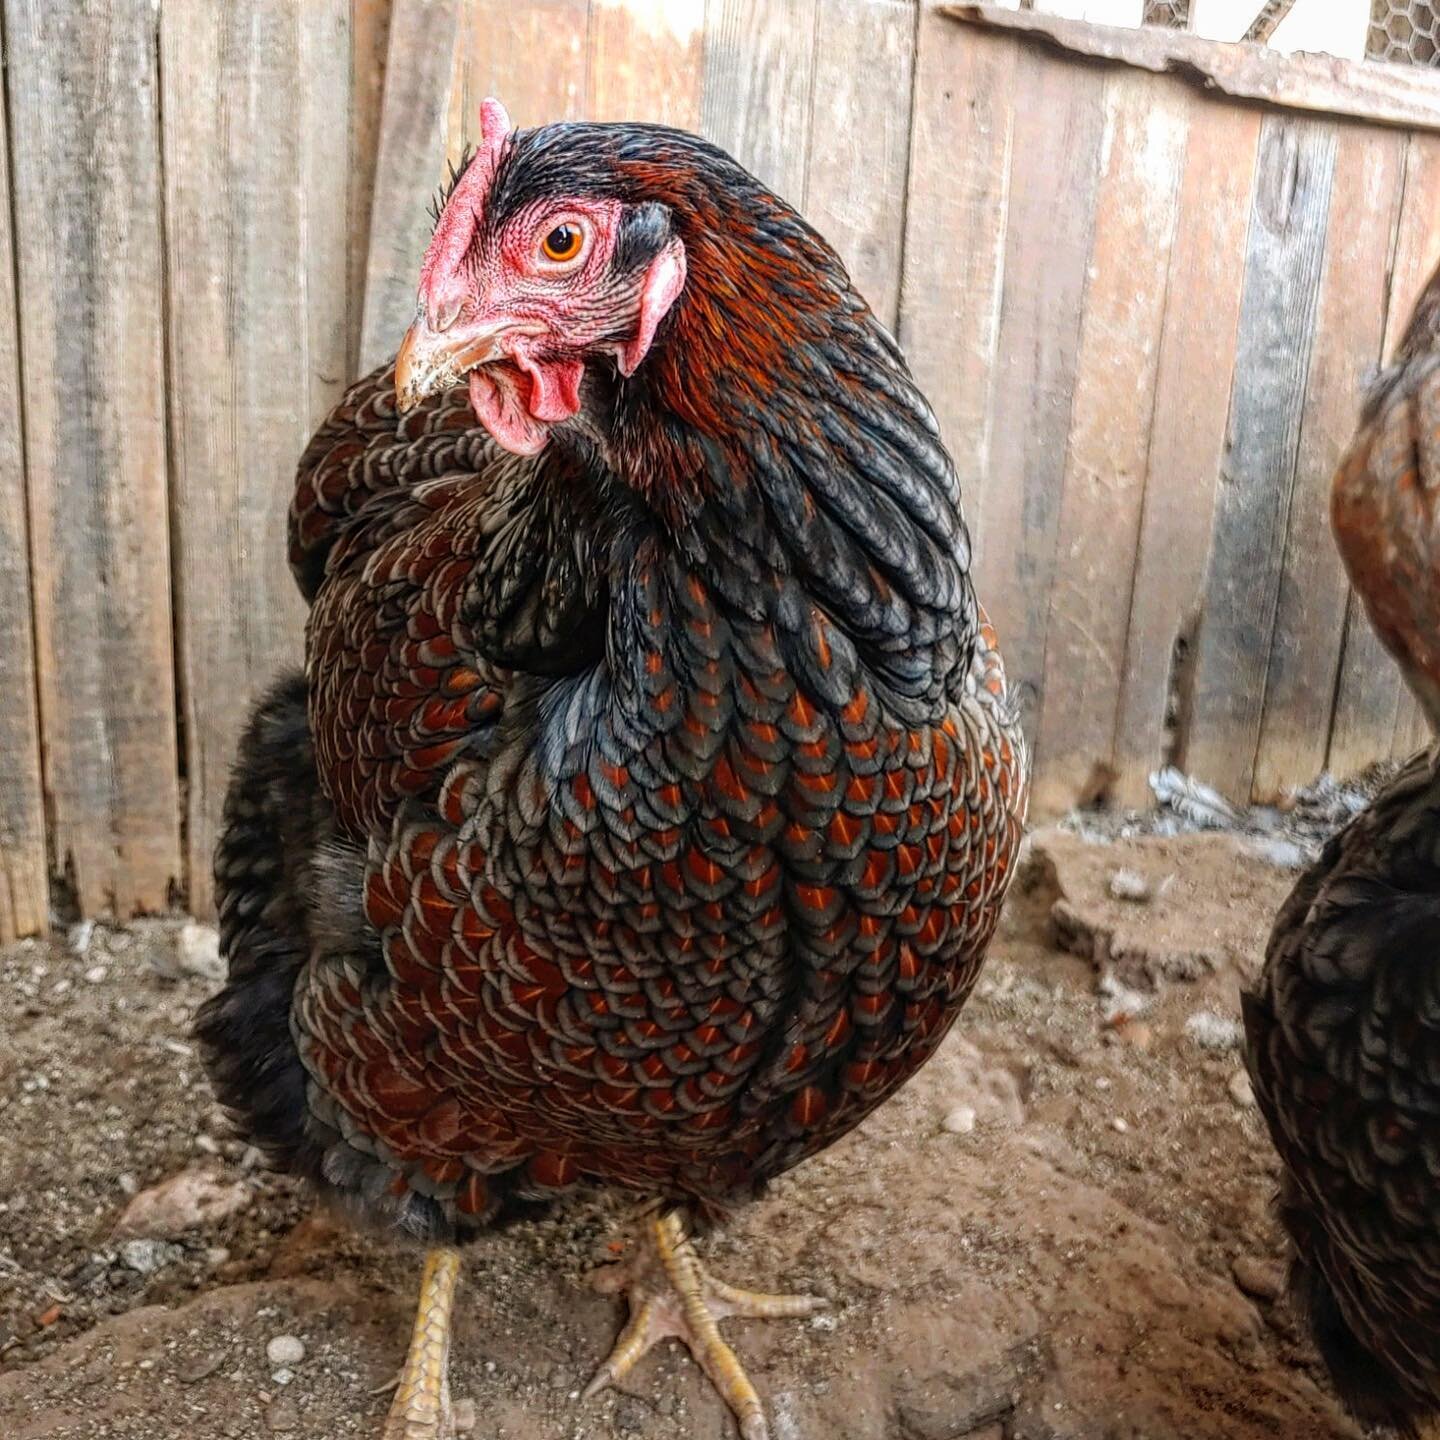 Chicks not your thing? 😒🐥 - 😁🐓
Pullets and cockerels are also available upon request! 

(Pictured is a Blue Red Laced Wyandotte, courtesy of Larenda&rsquo;s Poultry)